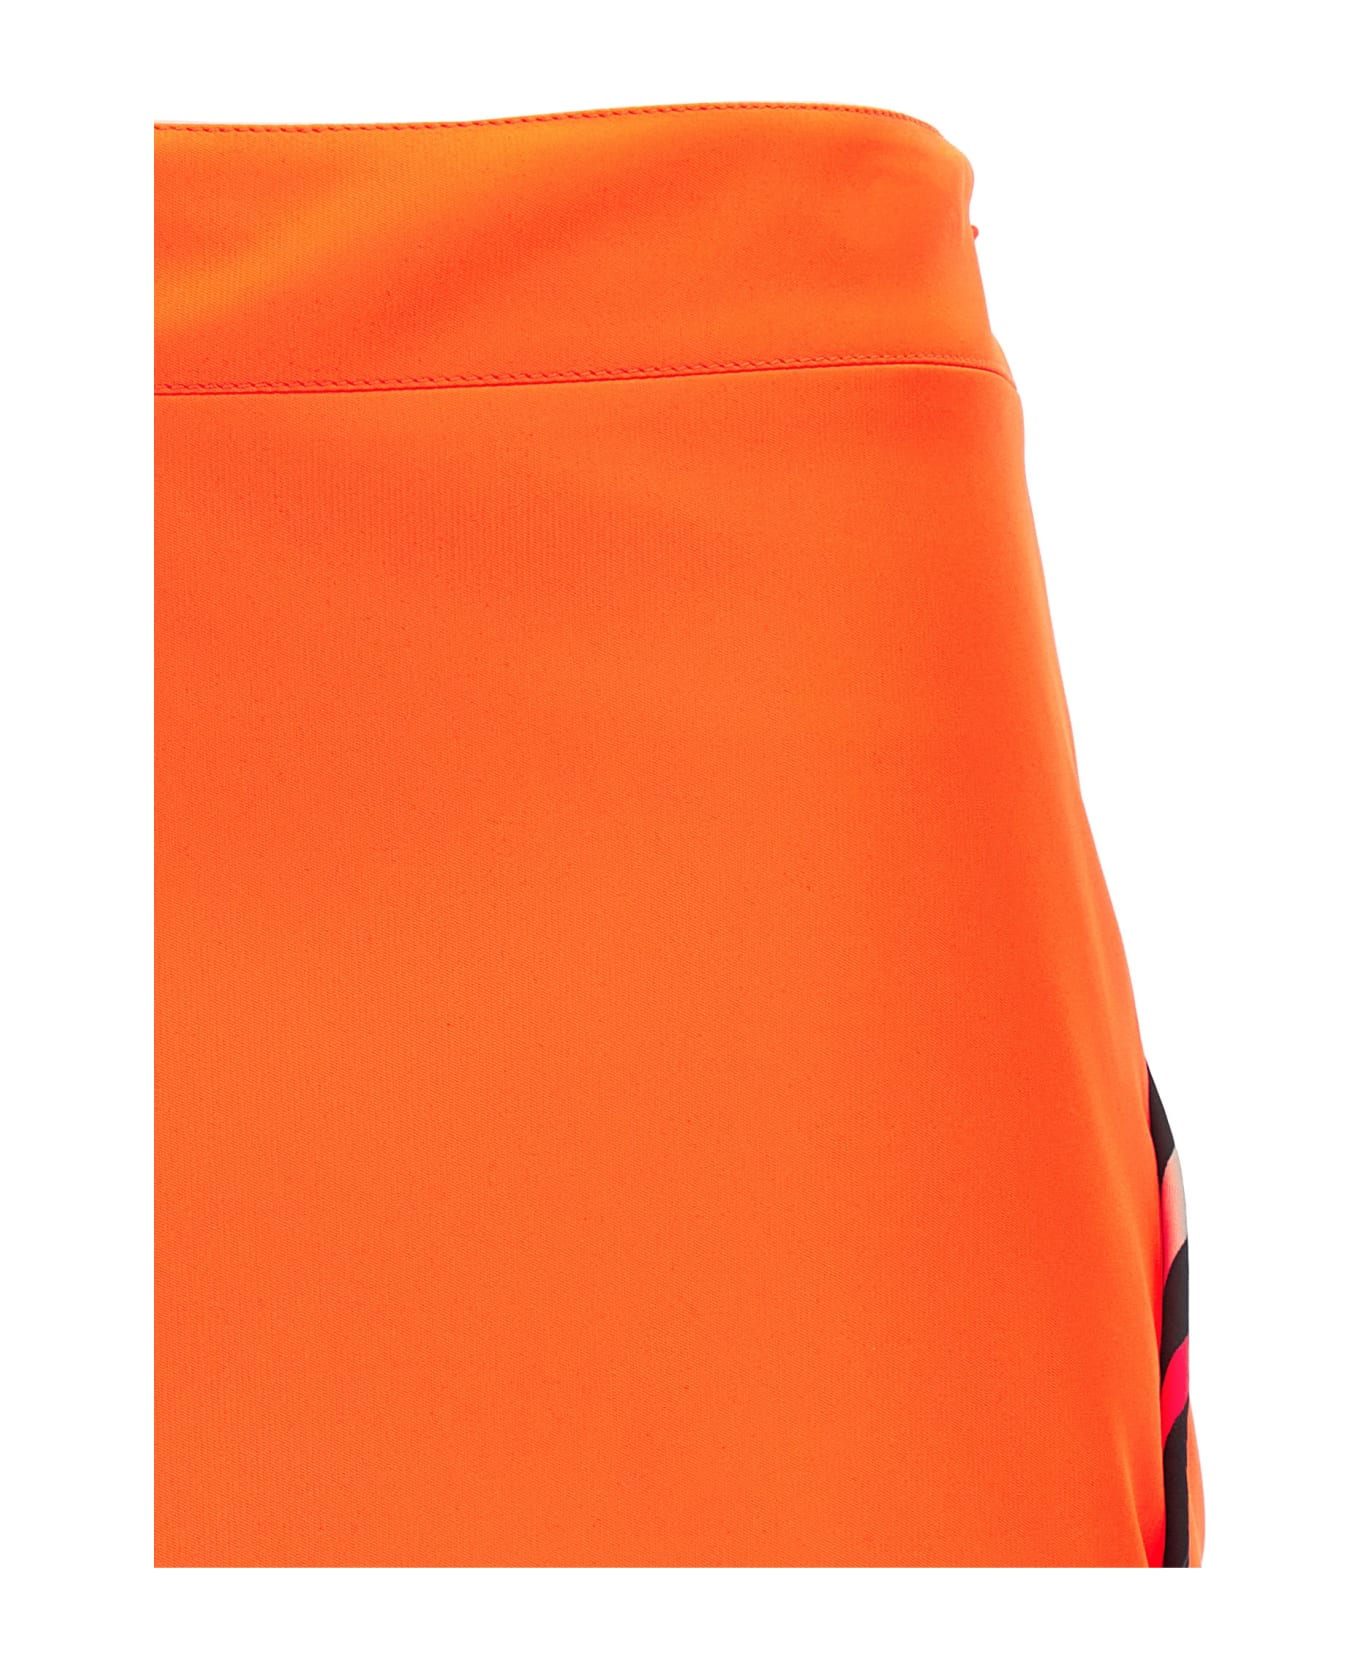 Pucci Contrasting Piping Neon Skirt - Orange スカート